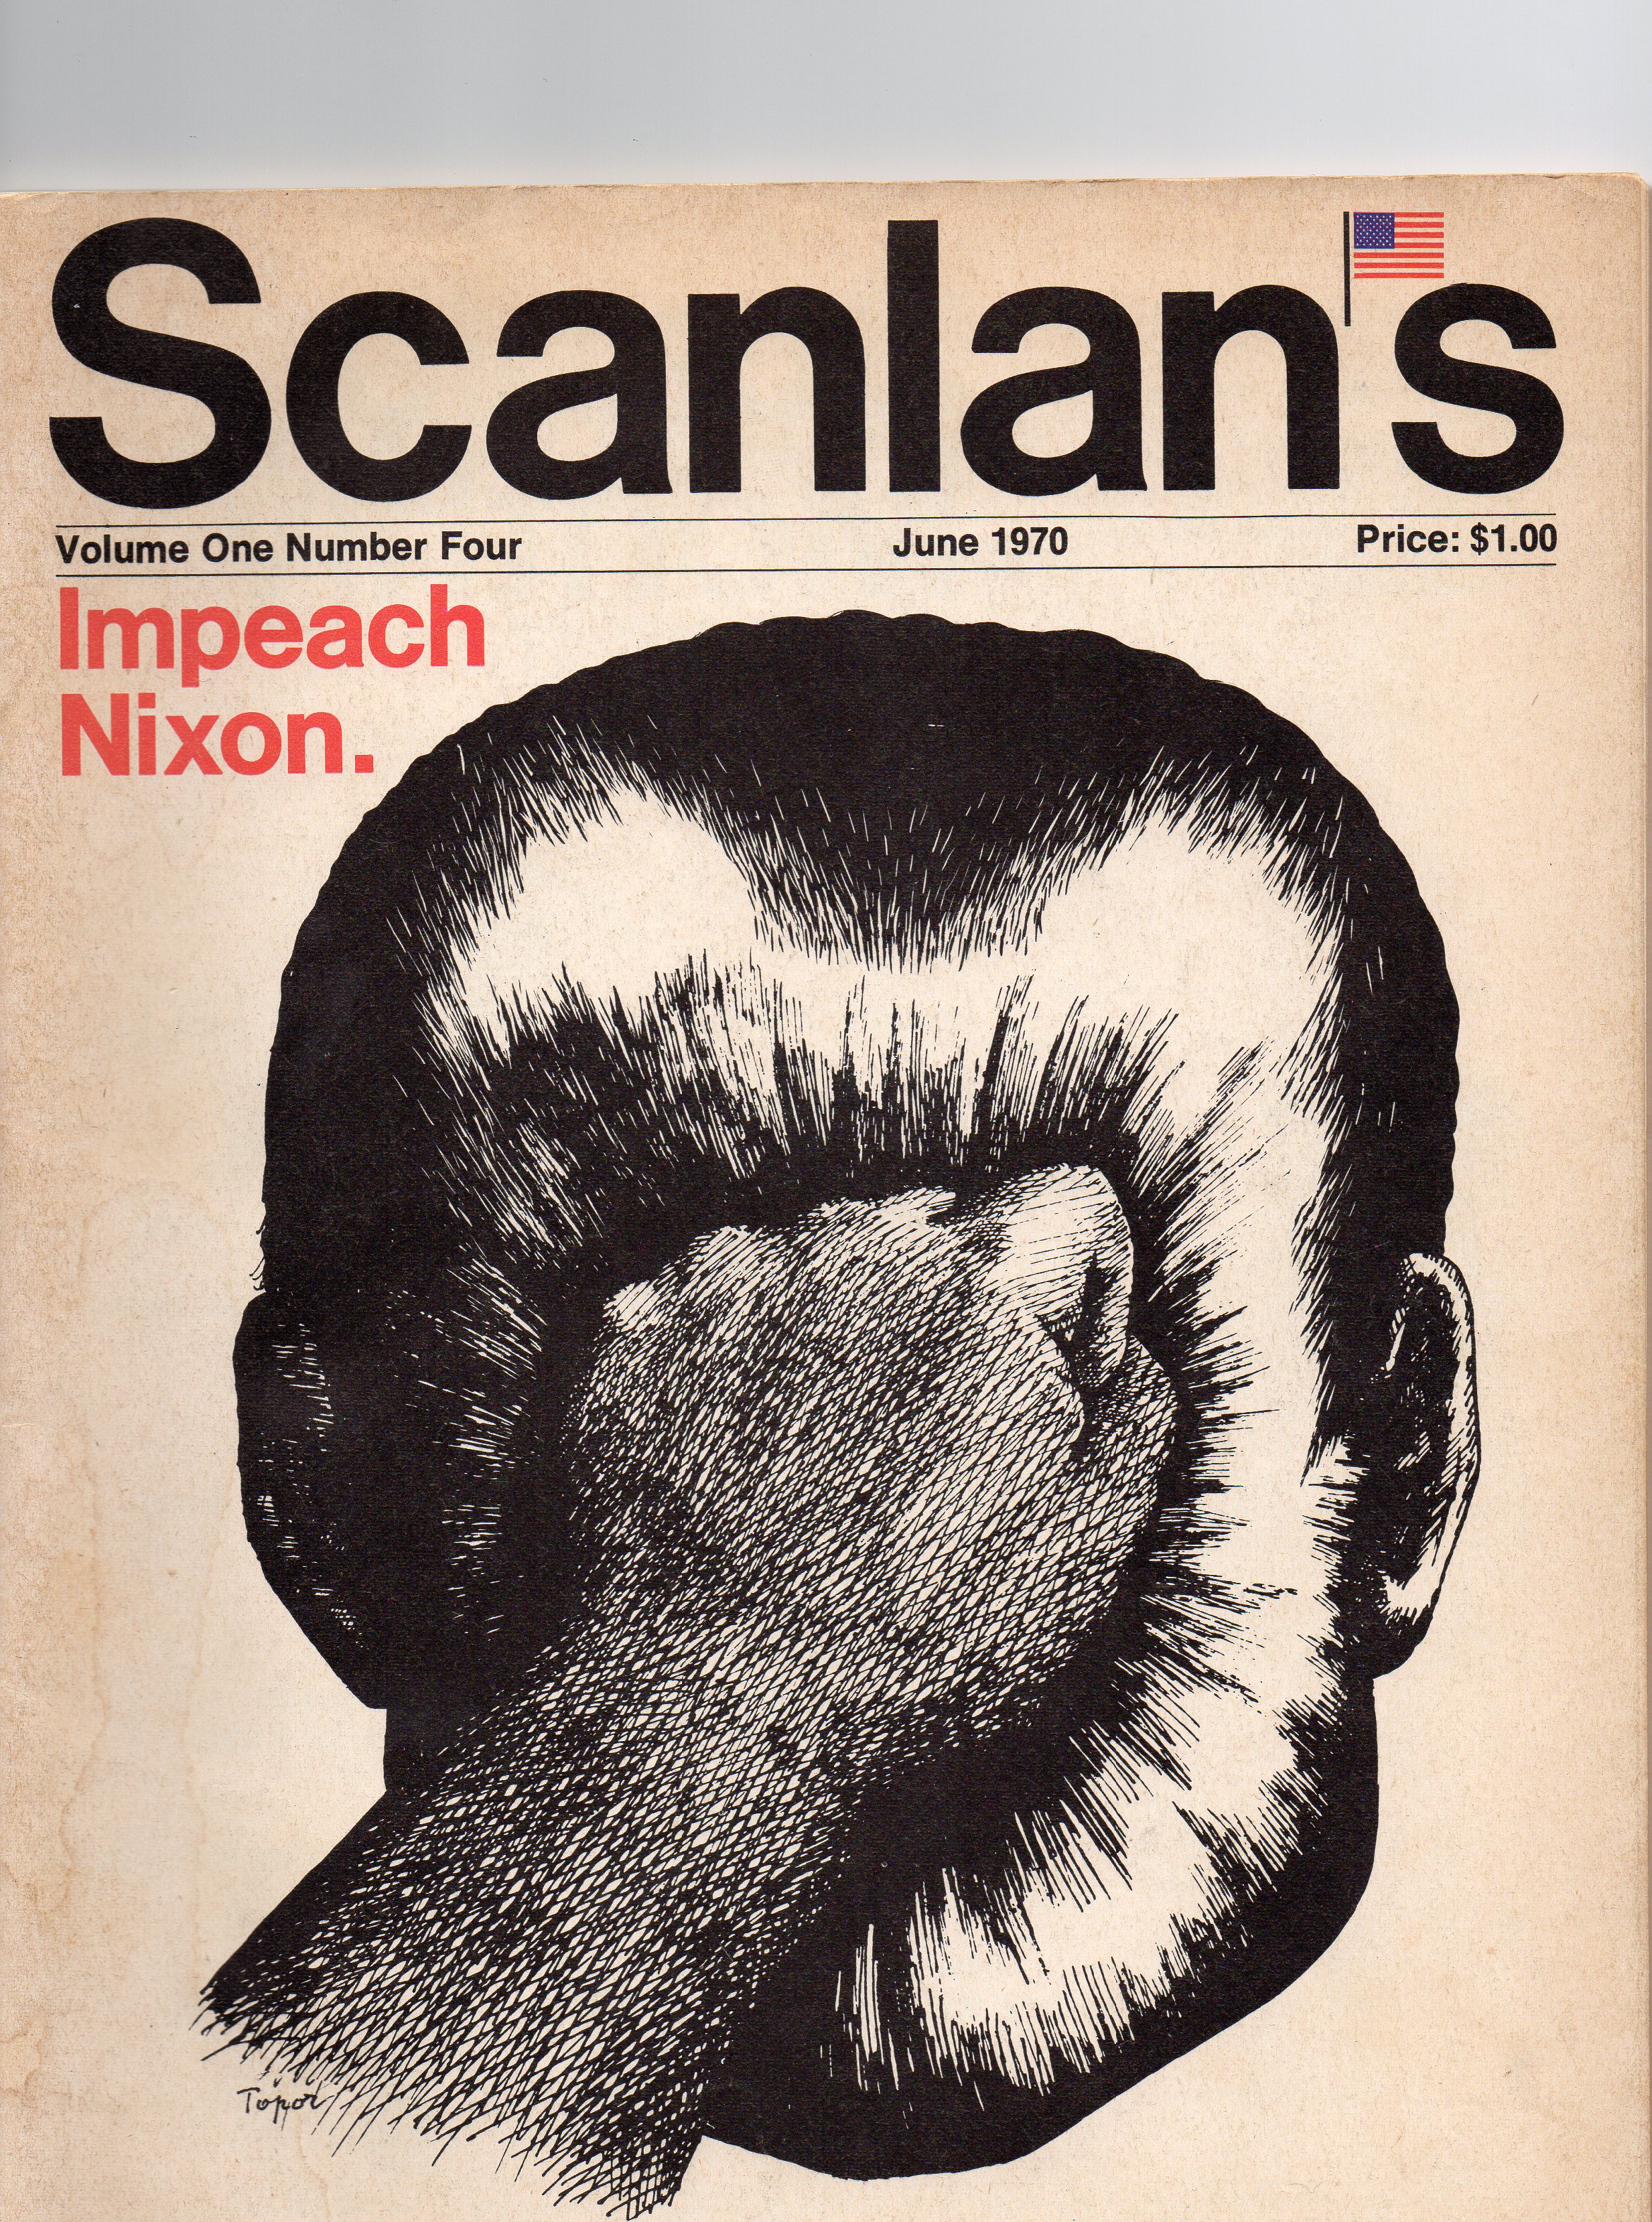 Scanlan’s Monthly 4, June 1970, from my personal collection